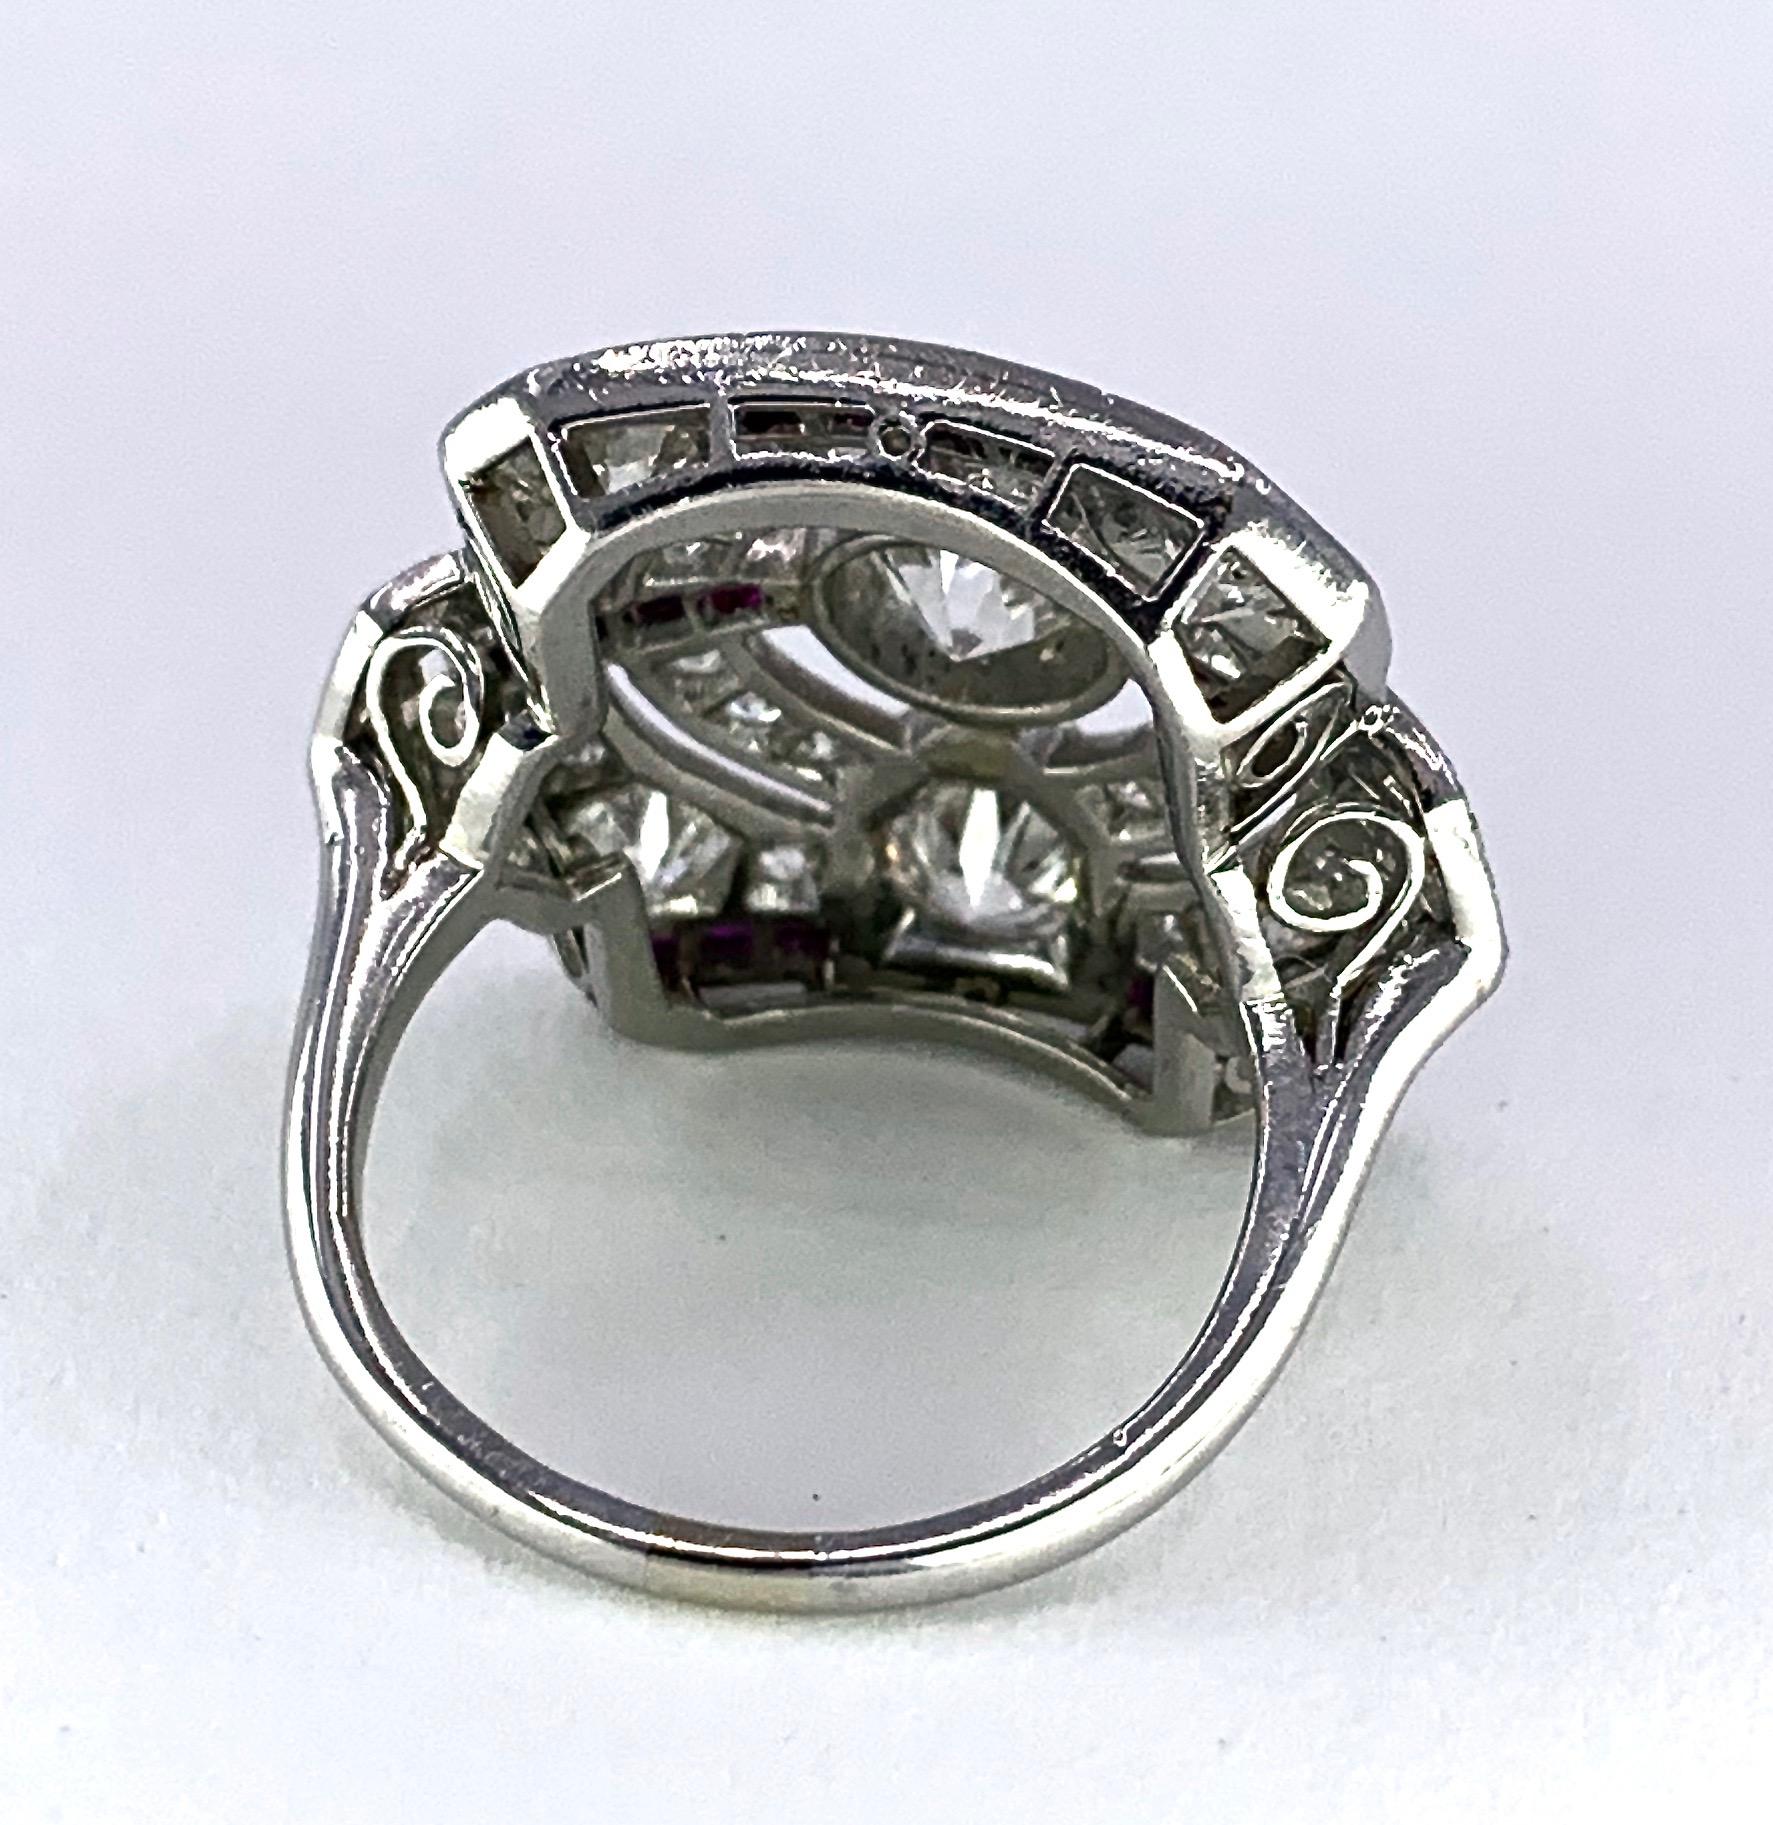 Art Deco 3 Carat Diamond and Ruby Tablet or Plaque Ring in Platinum, Circa 1925 For Sale 4